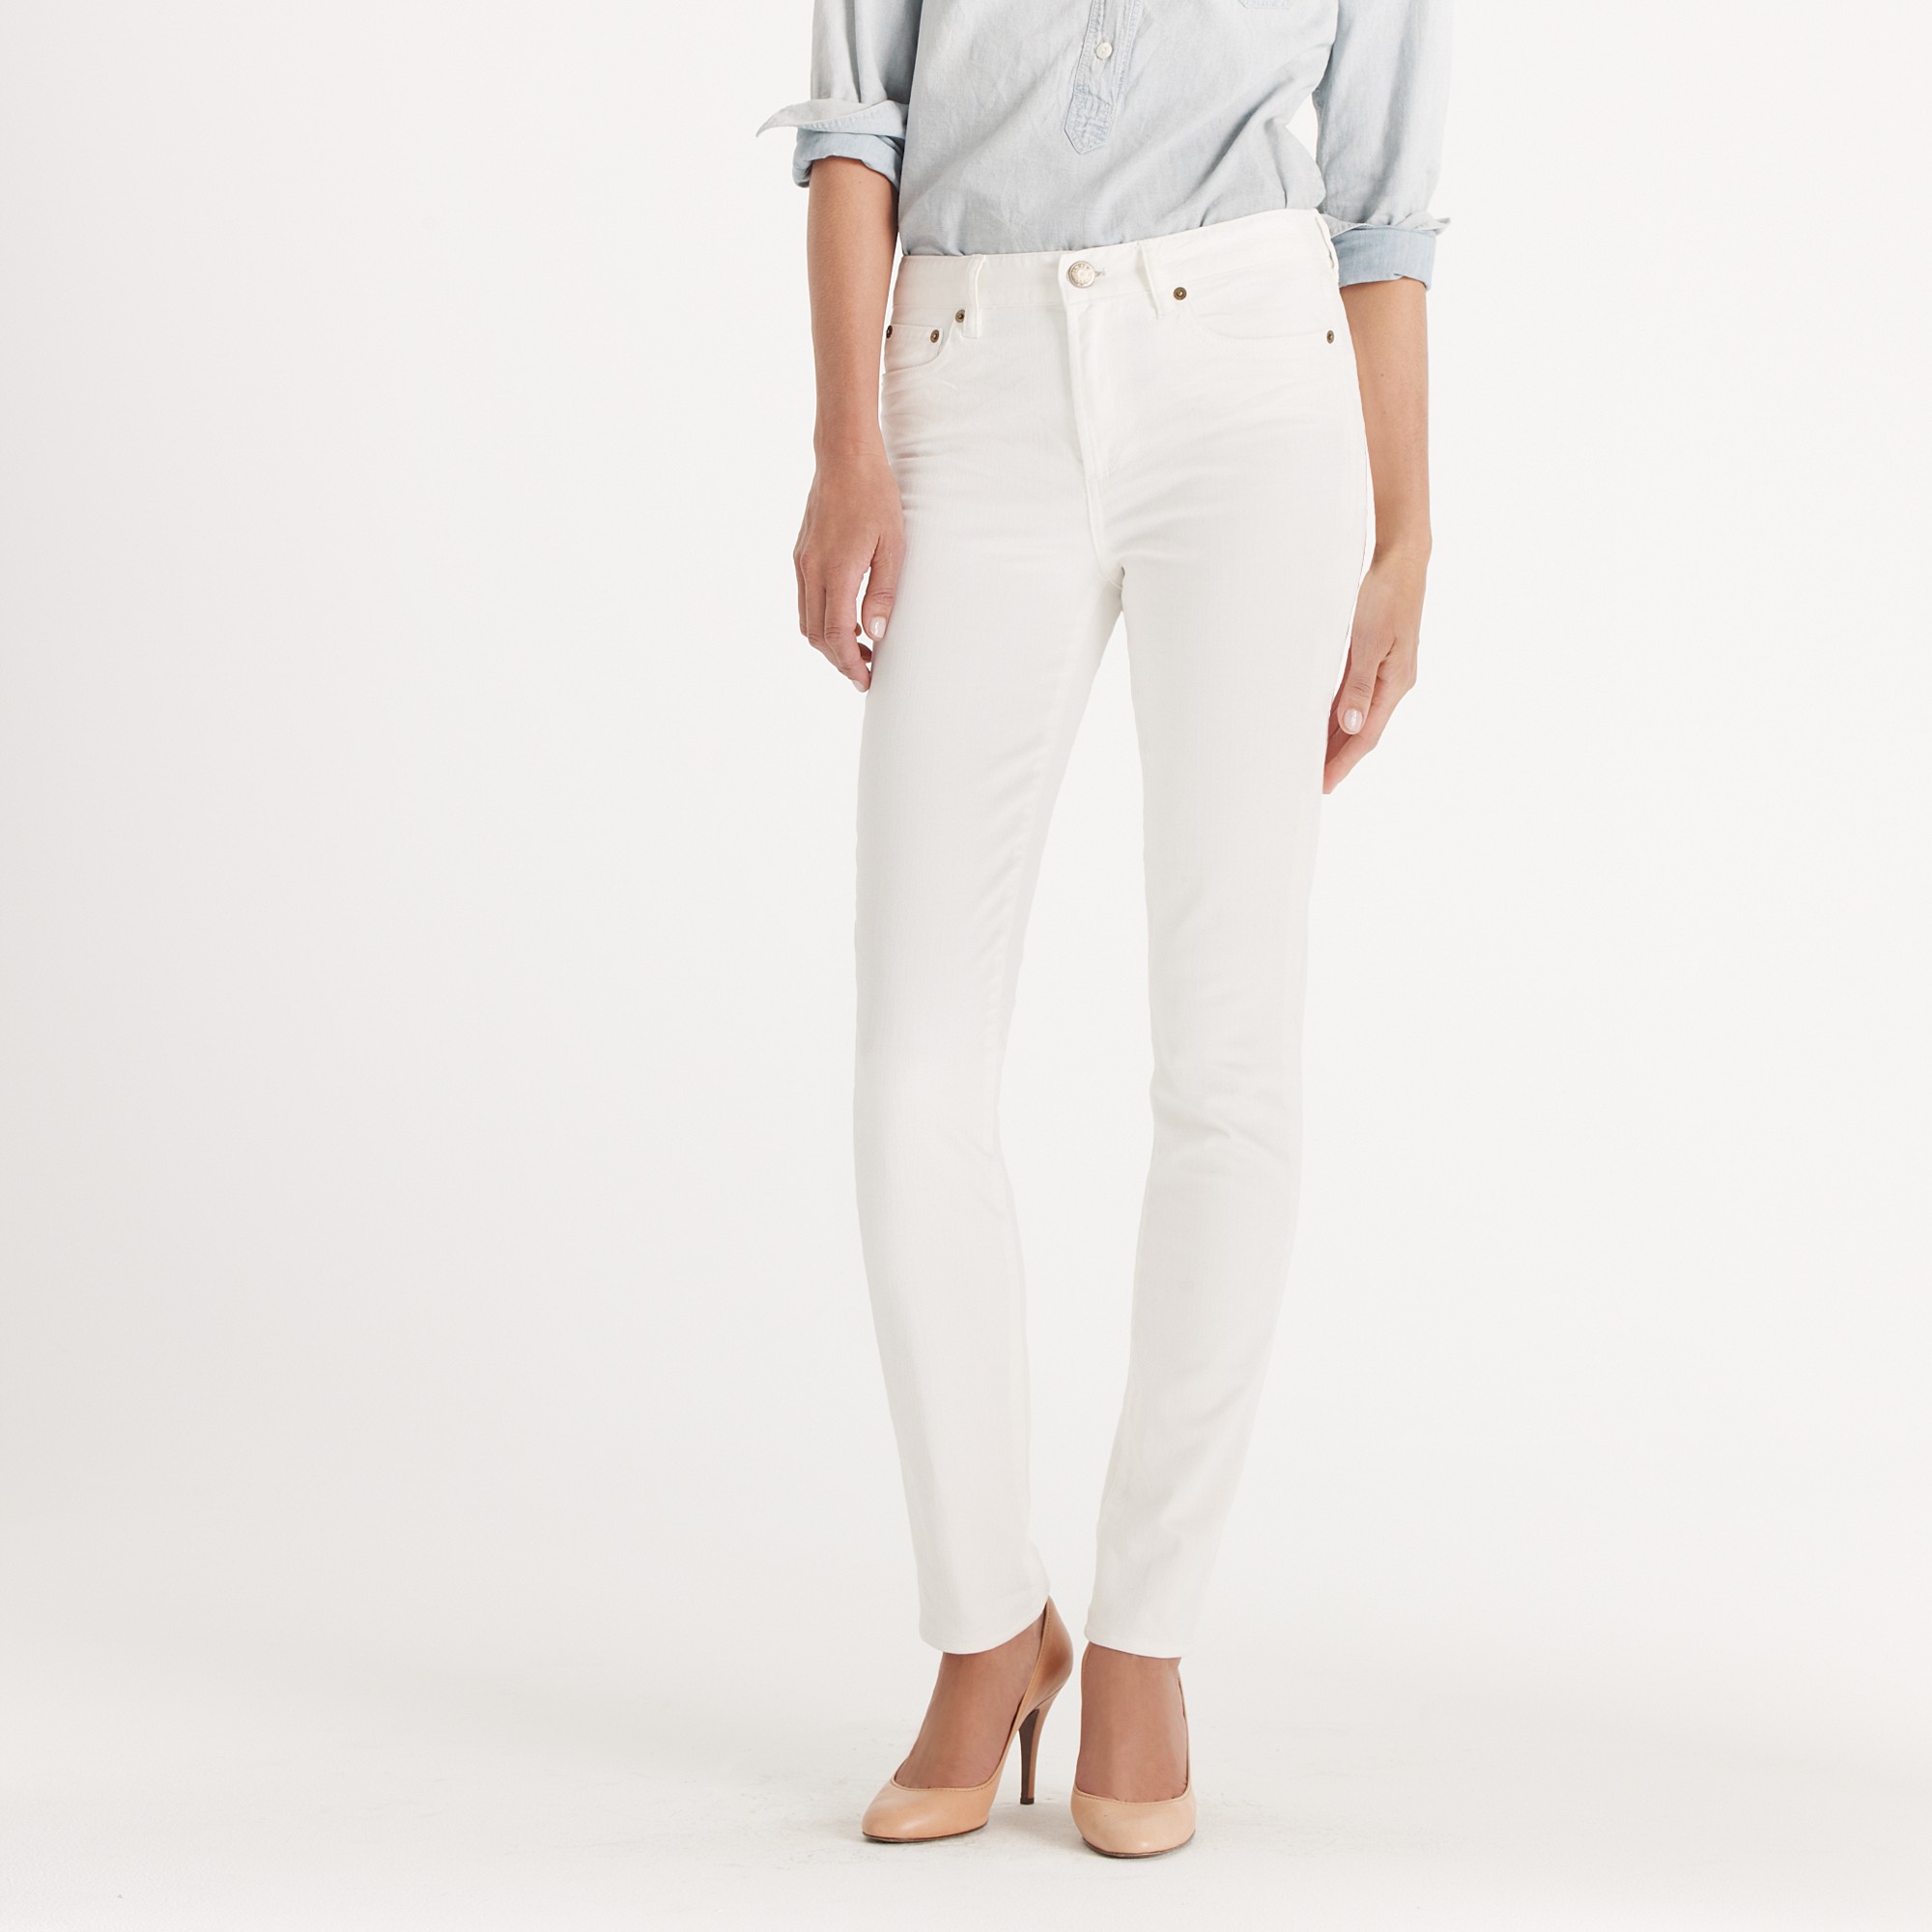 J.crew High-waisted Skinny Jean in White in White | Lyst